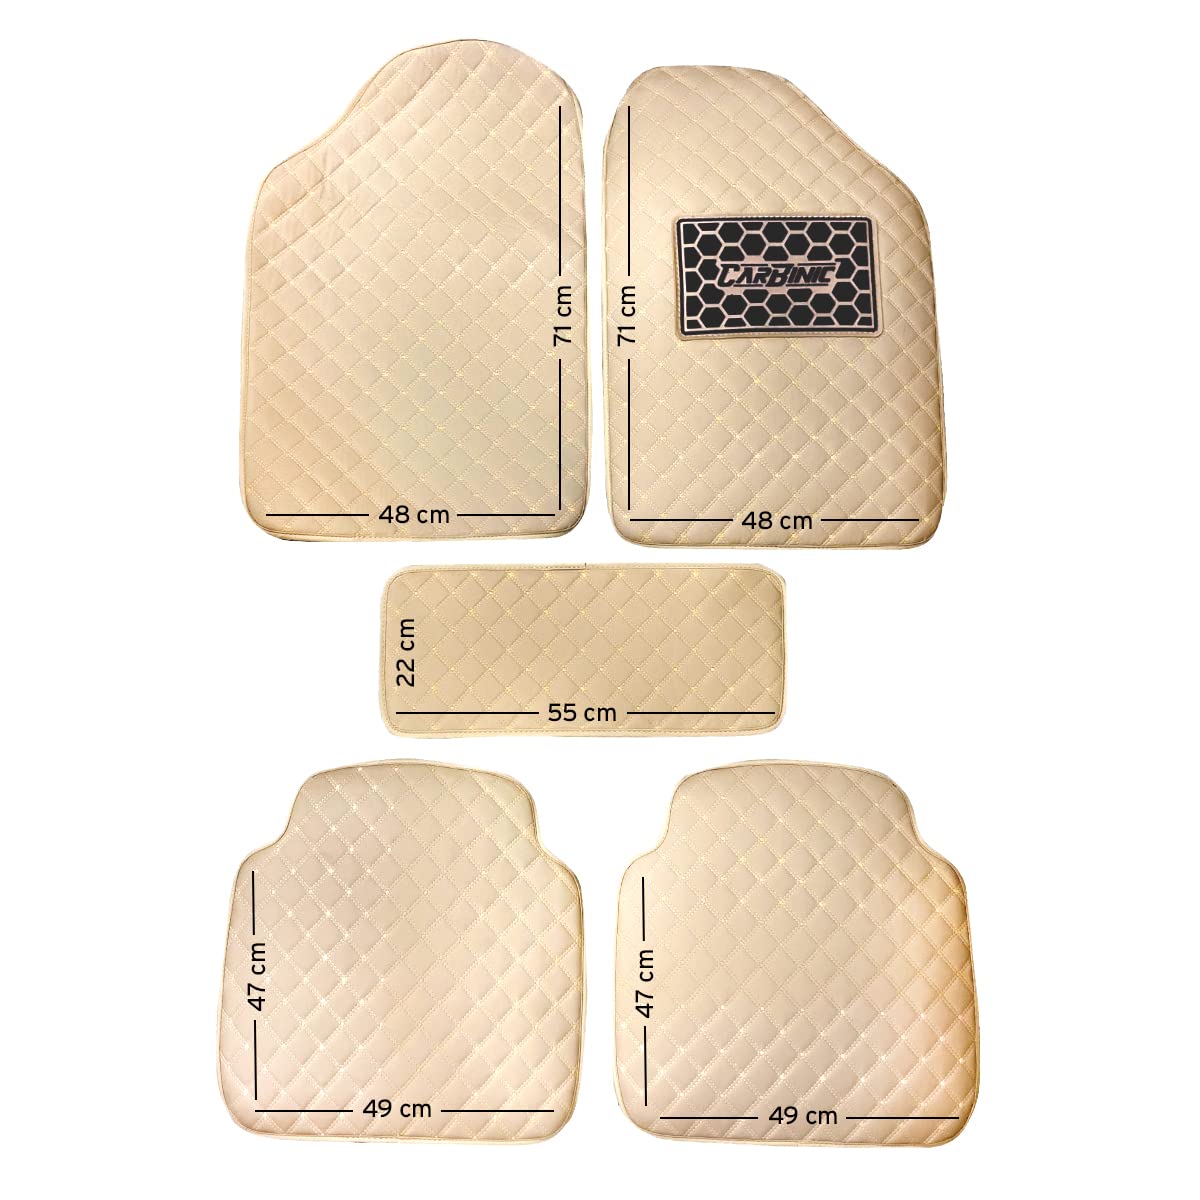 CarBinic 4D Premium Car Foot Mat - Universal Fits for All Cars | Premium Double Layered Leather| Shock Absorbent | Waterproof | Anti-Skid | Heel Pad | Car Accessories Interior | Beige